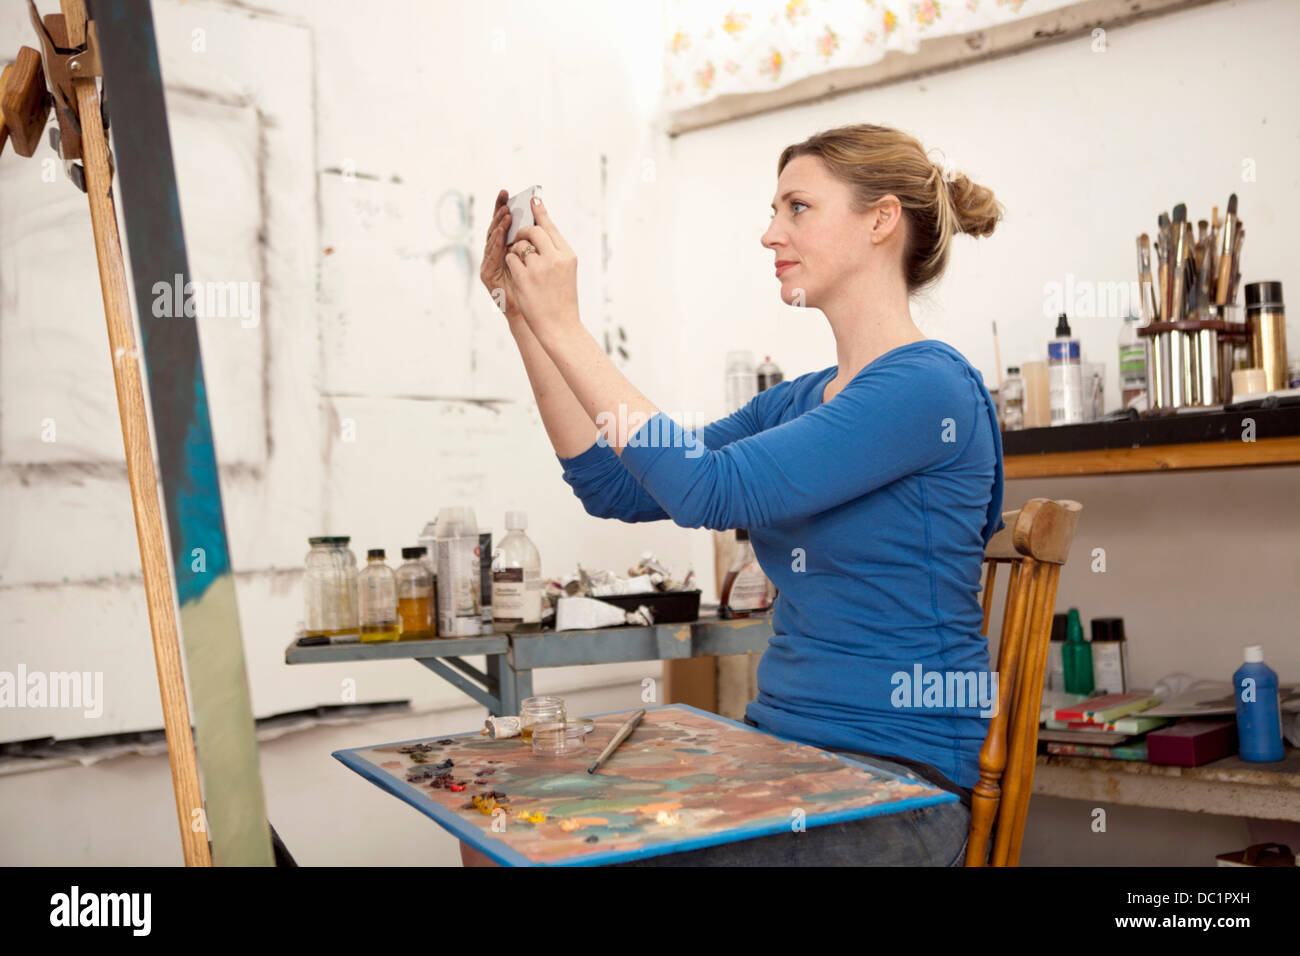 Mid adult woman photographing oil painting in artist's studio Stock Photo